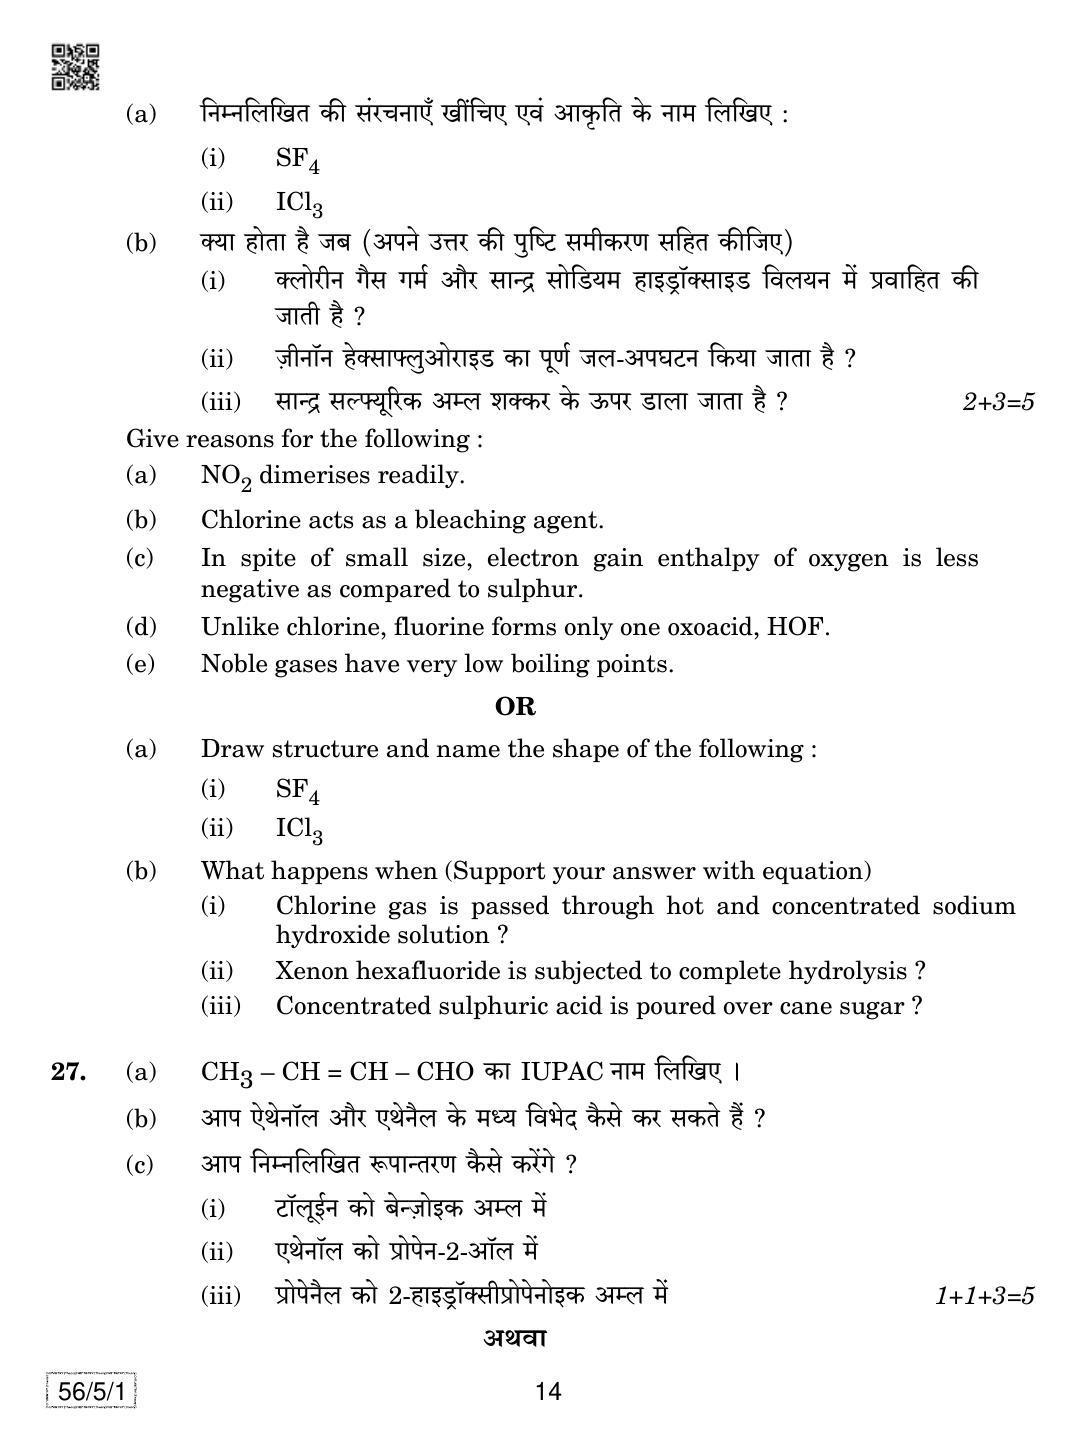 CBSE Class 12 56-5-1 Chemistry 2019 Question Paper - Page 14